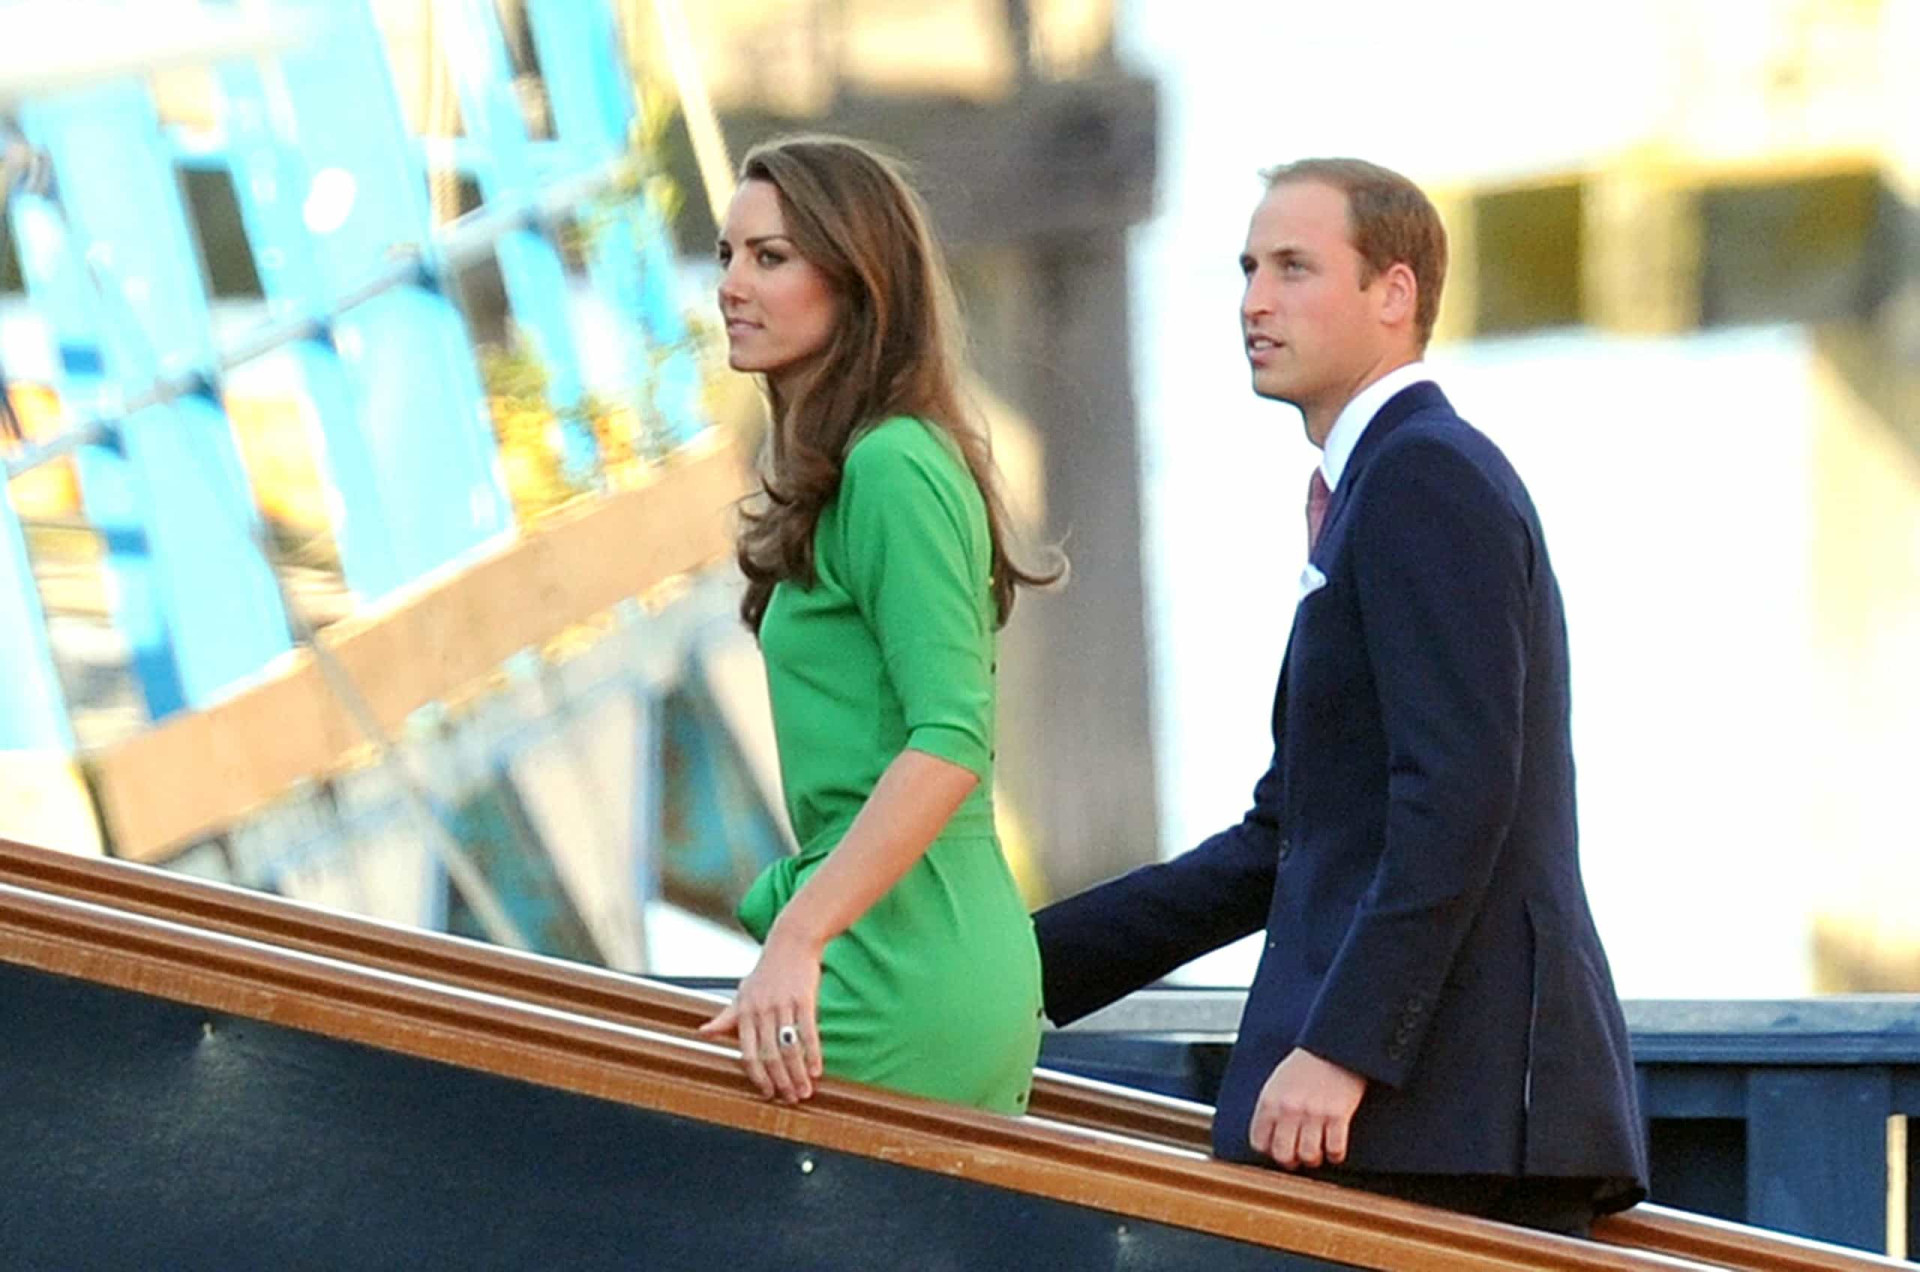 <p><em>Britannia</em> still hosts the occasional royal get-together. Pictured on July 29, 2011 are Kate and William arriving for an evening reception onboard the royal yacht to celebrate the impending wedding of Zara Phillips (the eldest granddaughter of Queen Elizabeth II) and Mike Tindall.</p><p><a href="https://www.msn.com/en-sg/community/channel/vid-7xx8mnucu55yw63we9va2gwr7uihbxwc68fxqp25x6tg4ftibpra?cvid=94631541bc0f4f89bfd59158d696ad7e">Follow us and access great exclusive content every day</a></p>